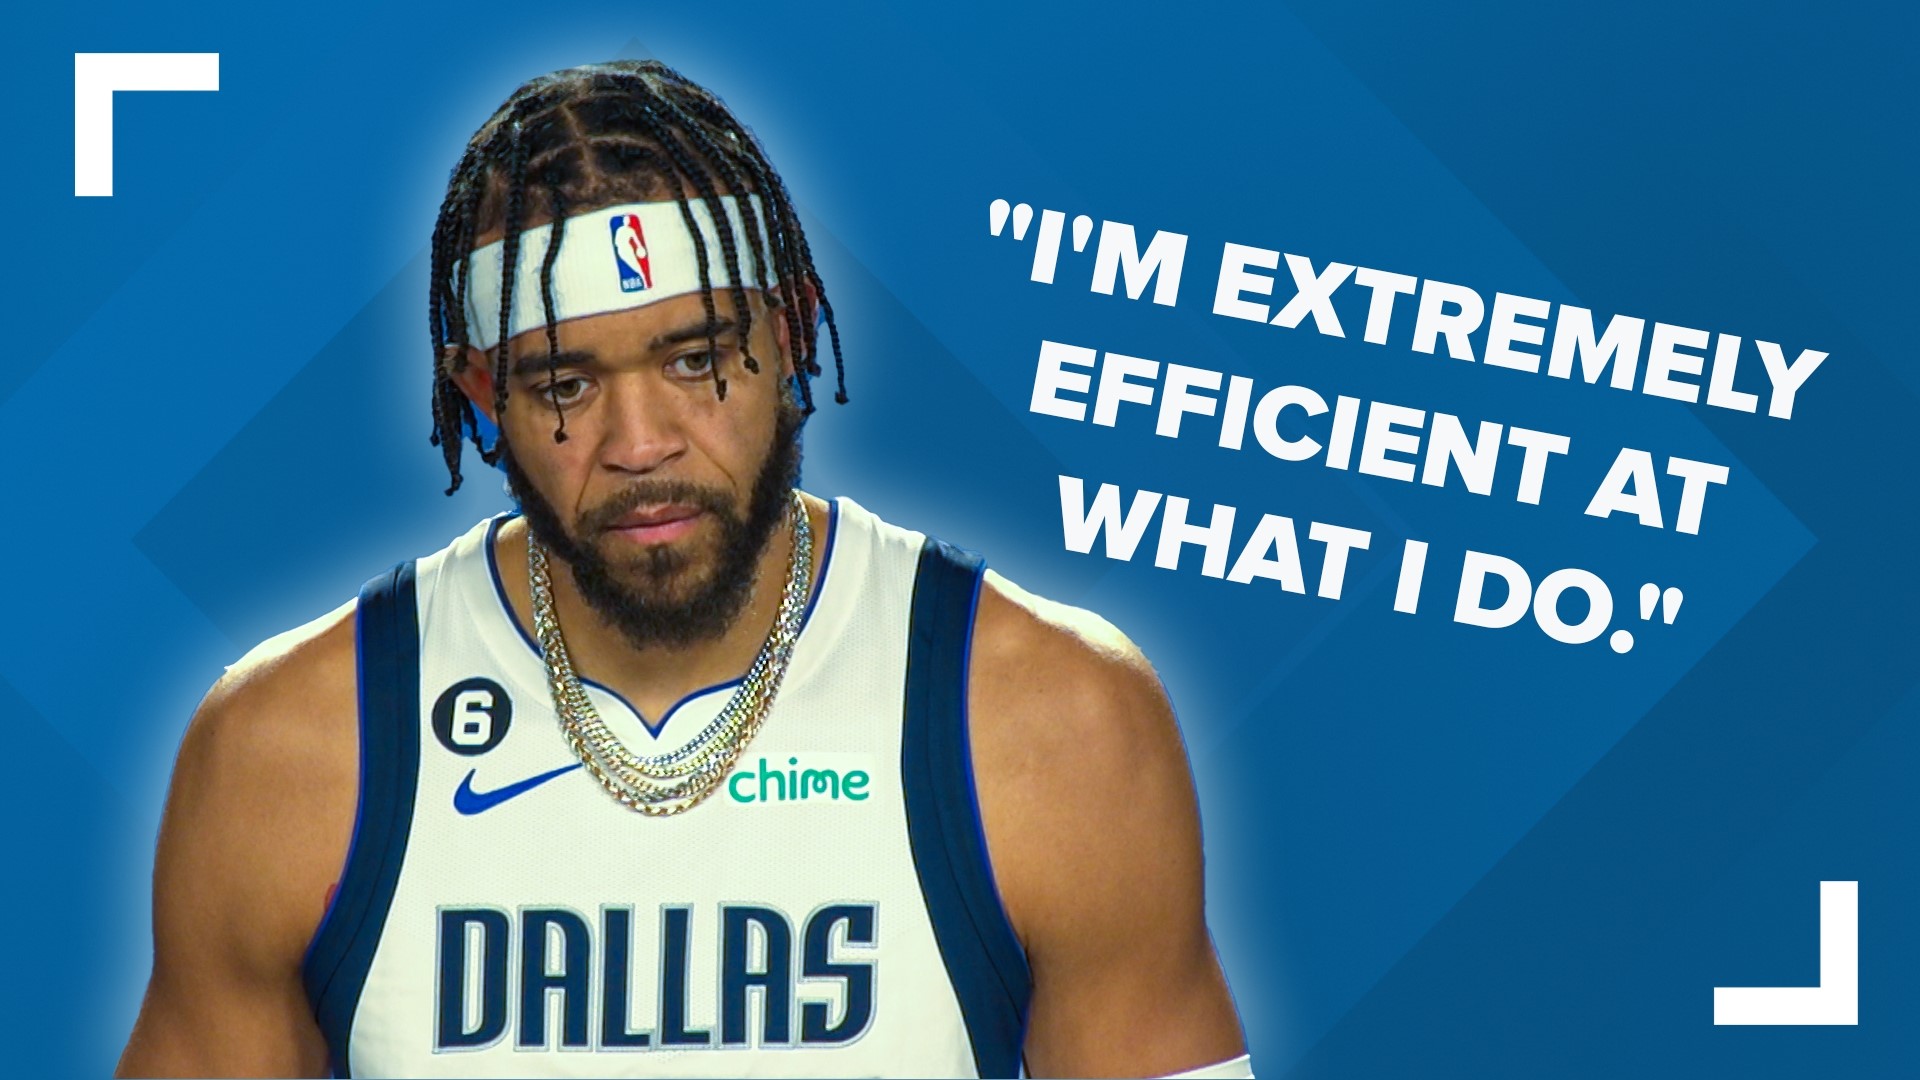 JaVale McGee spoke on Monday during Mavs Media Day and talked about his expectations going into the 2022-2023 NBA season.